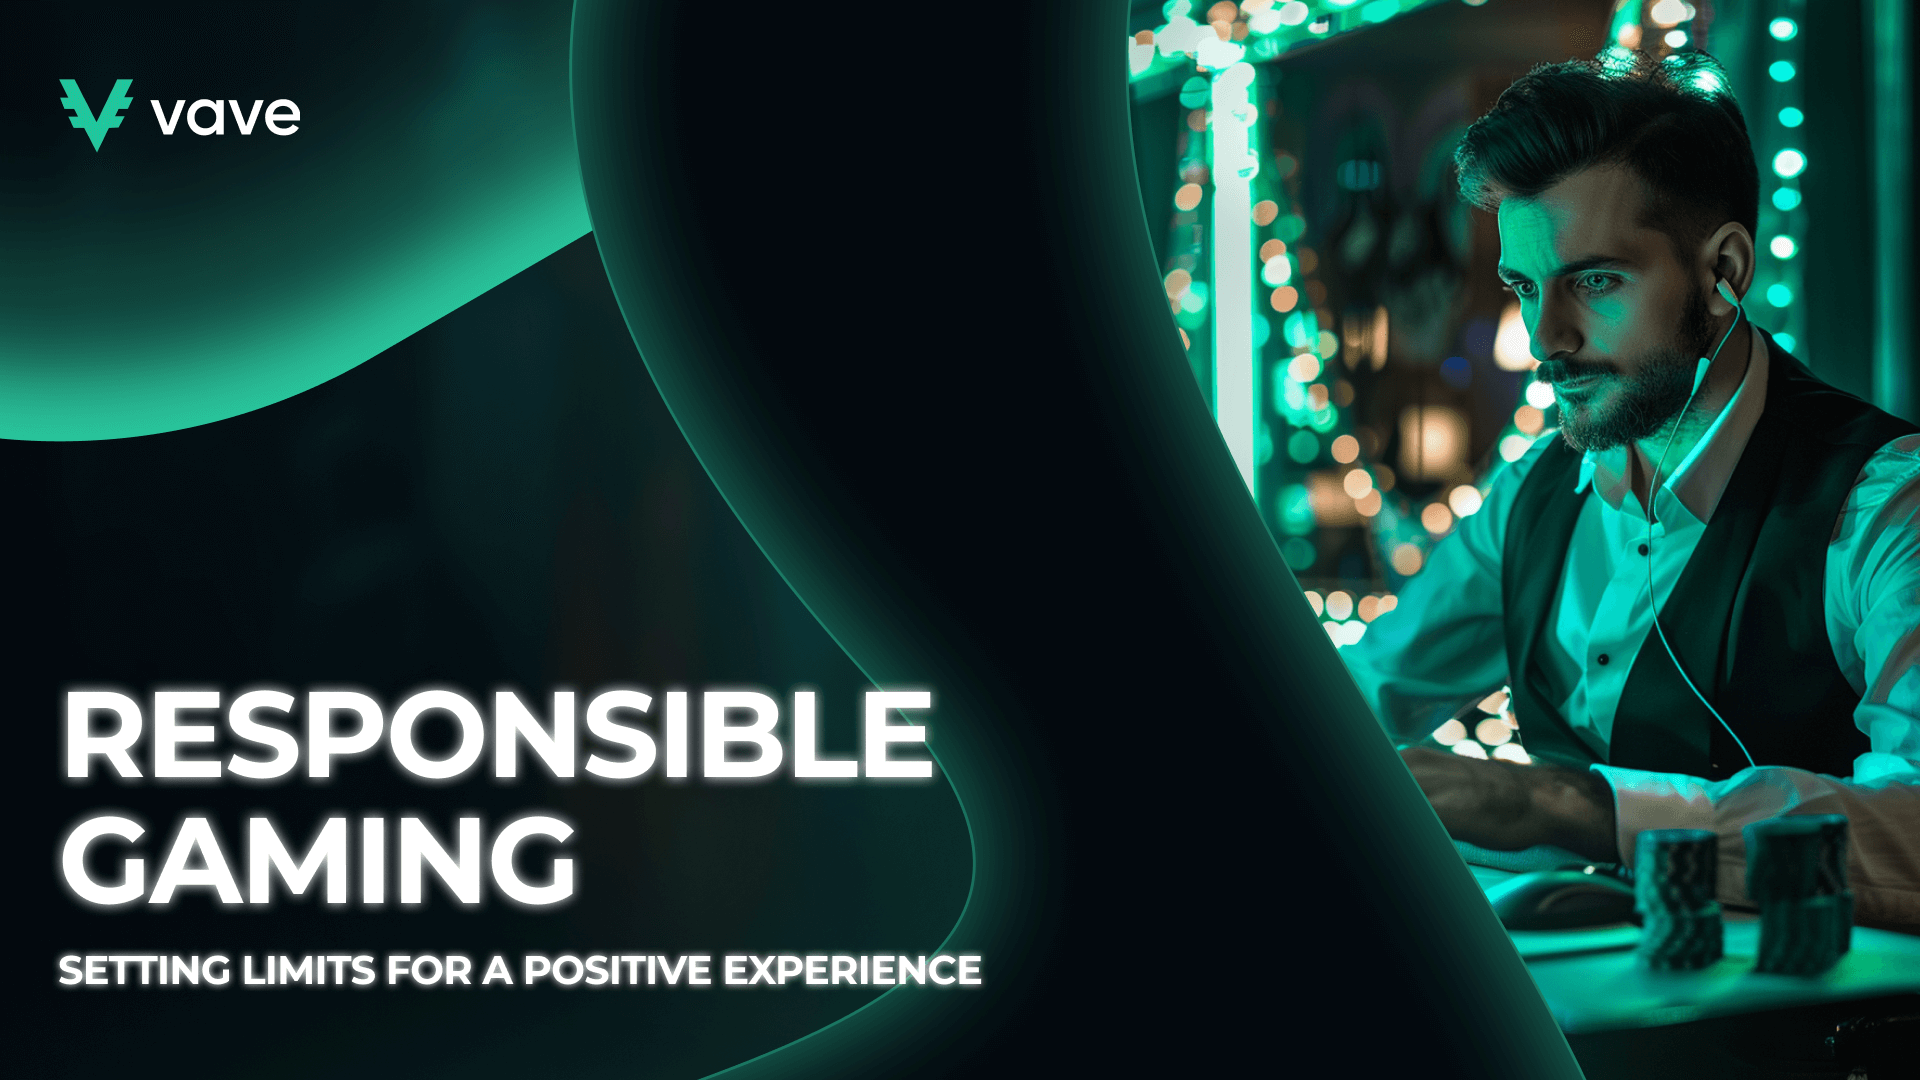 Responsible Gaming: Setting Limits for a Positive Experience